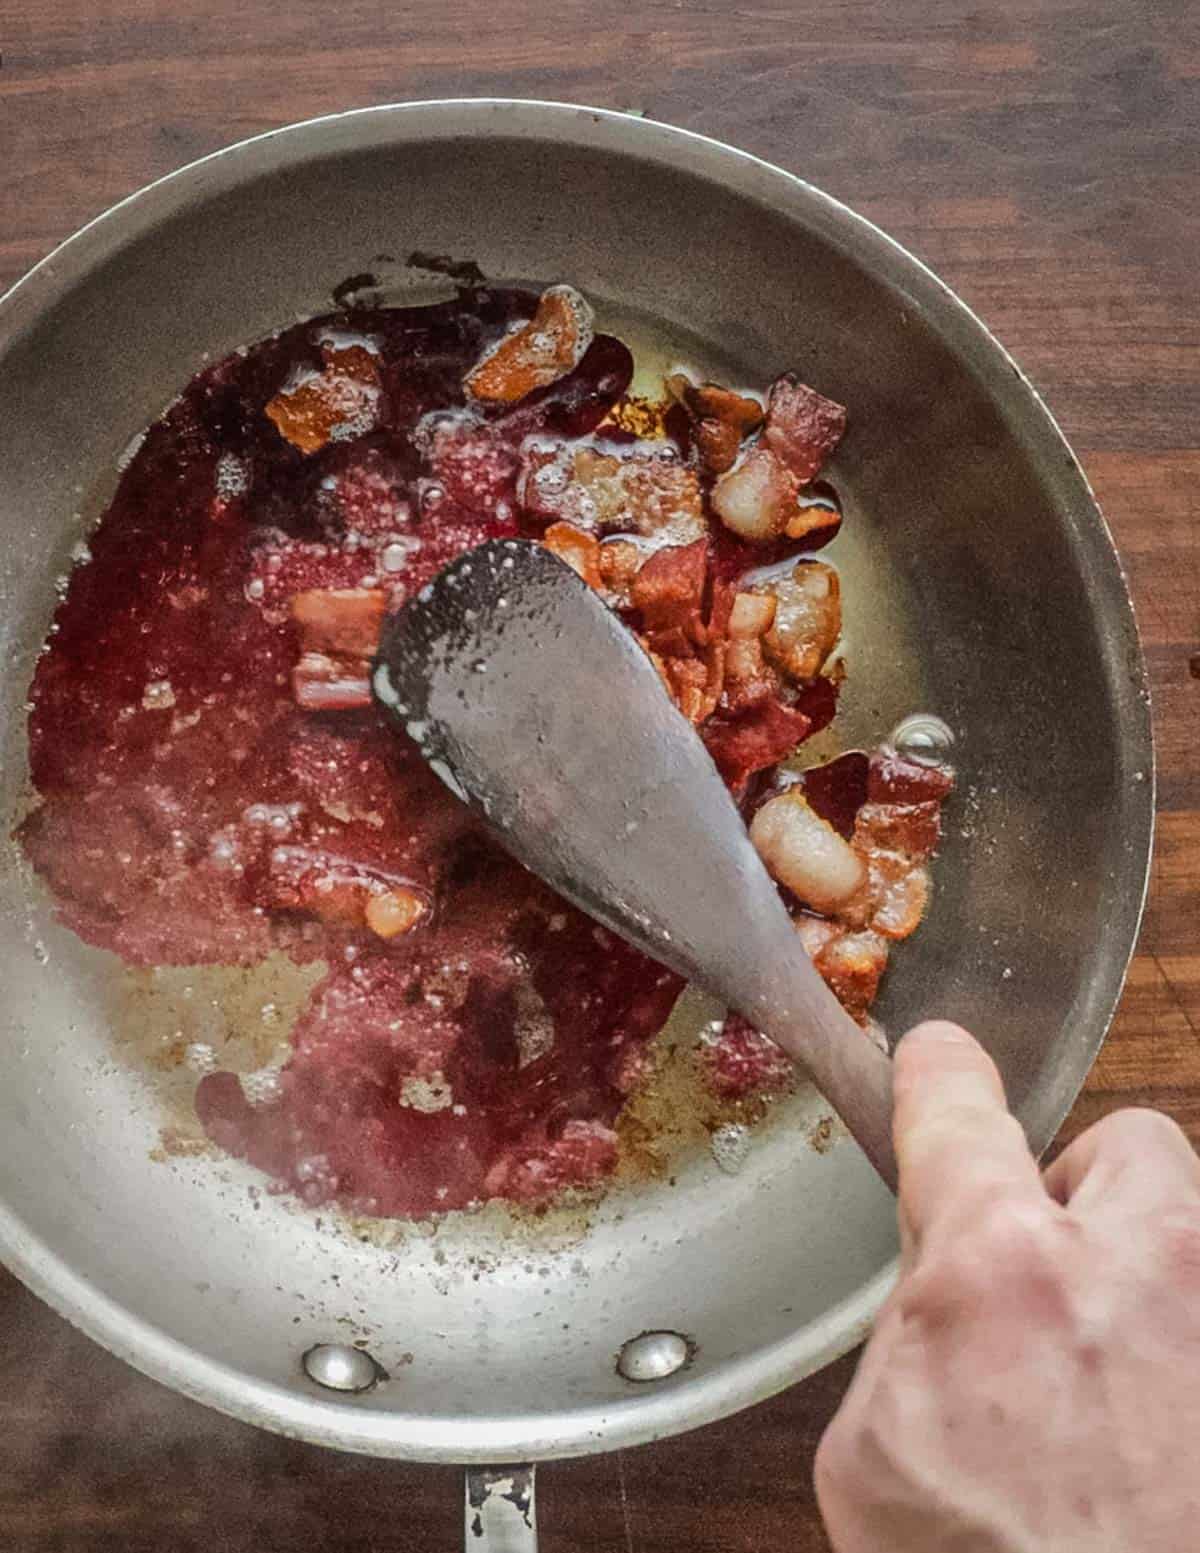 Scraping up the browned bits of bacon with a spoon. 